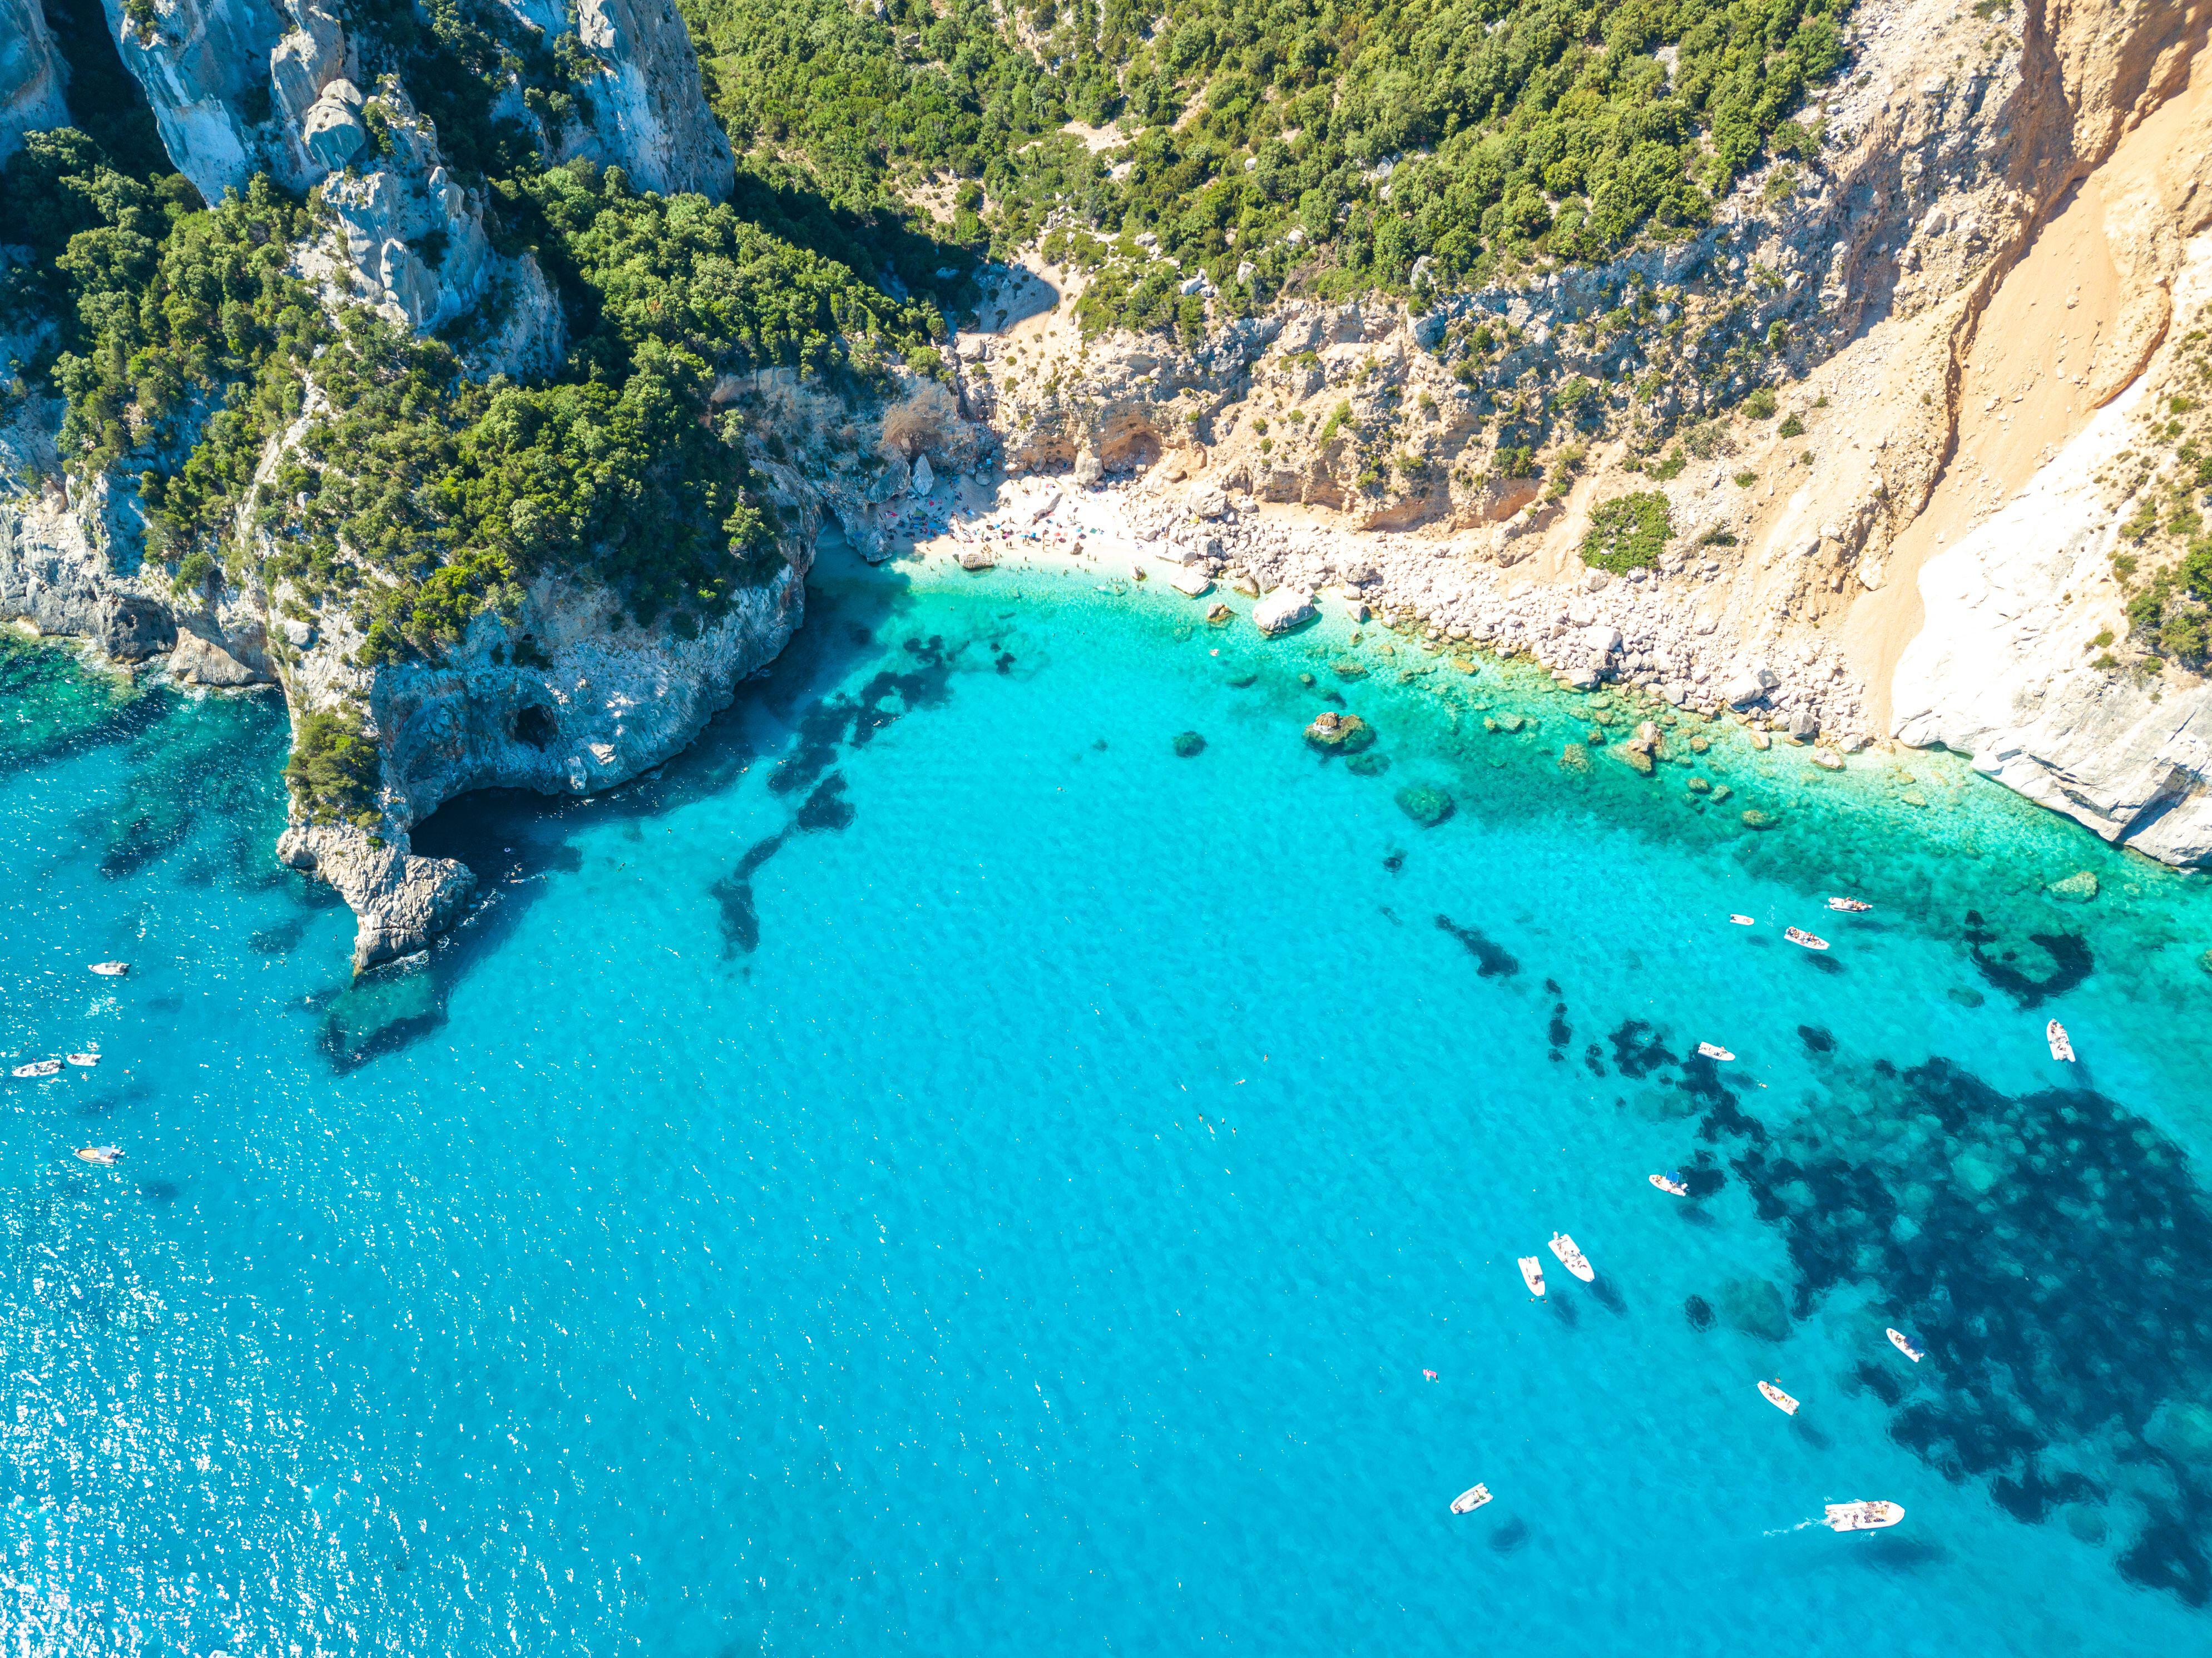 Cala Mariolu in Sardinia, Italy was named the second best beach in the world